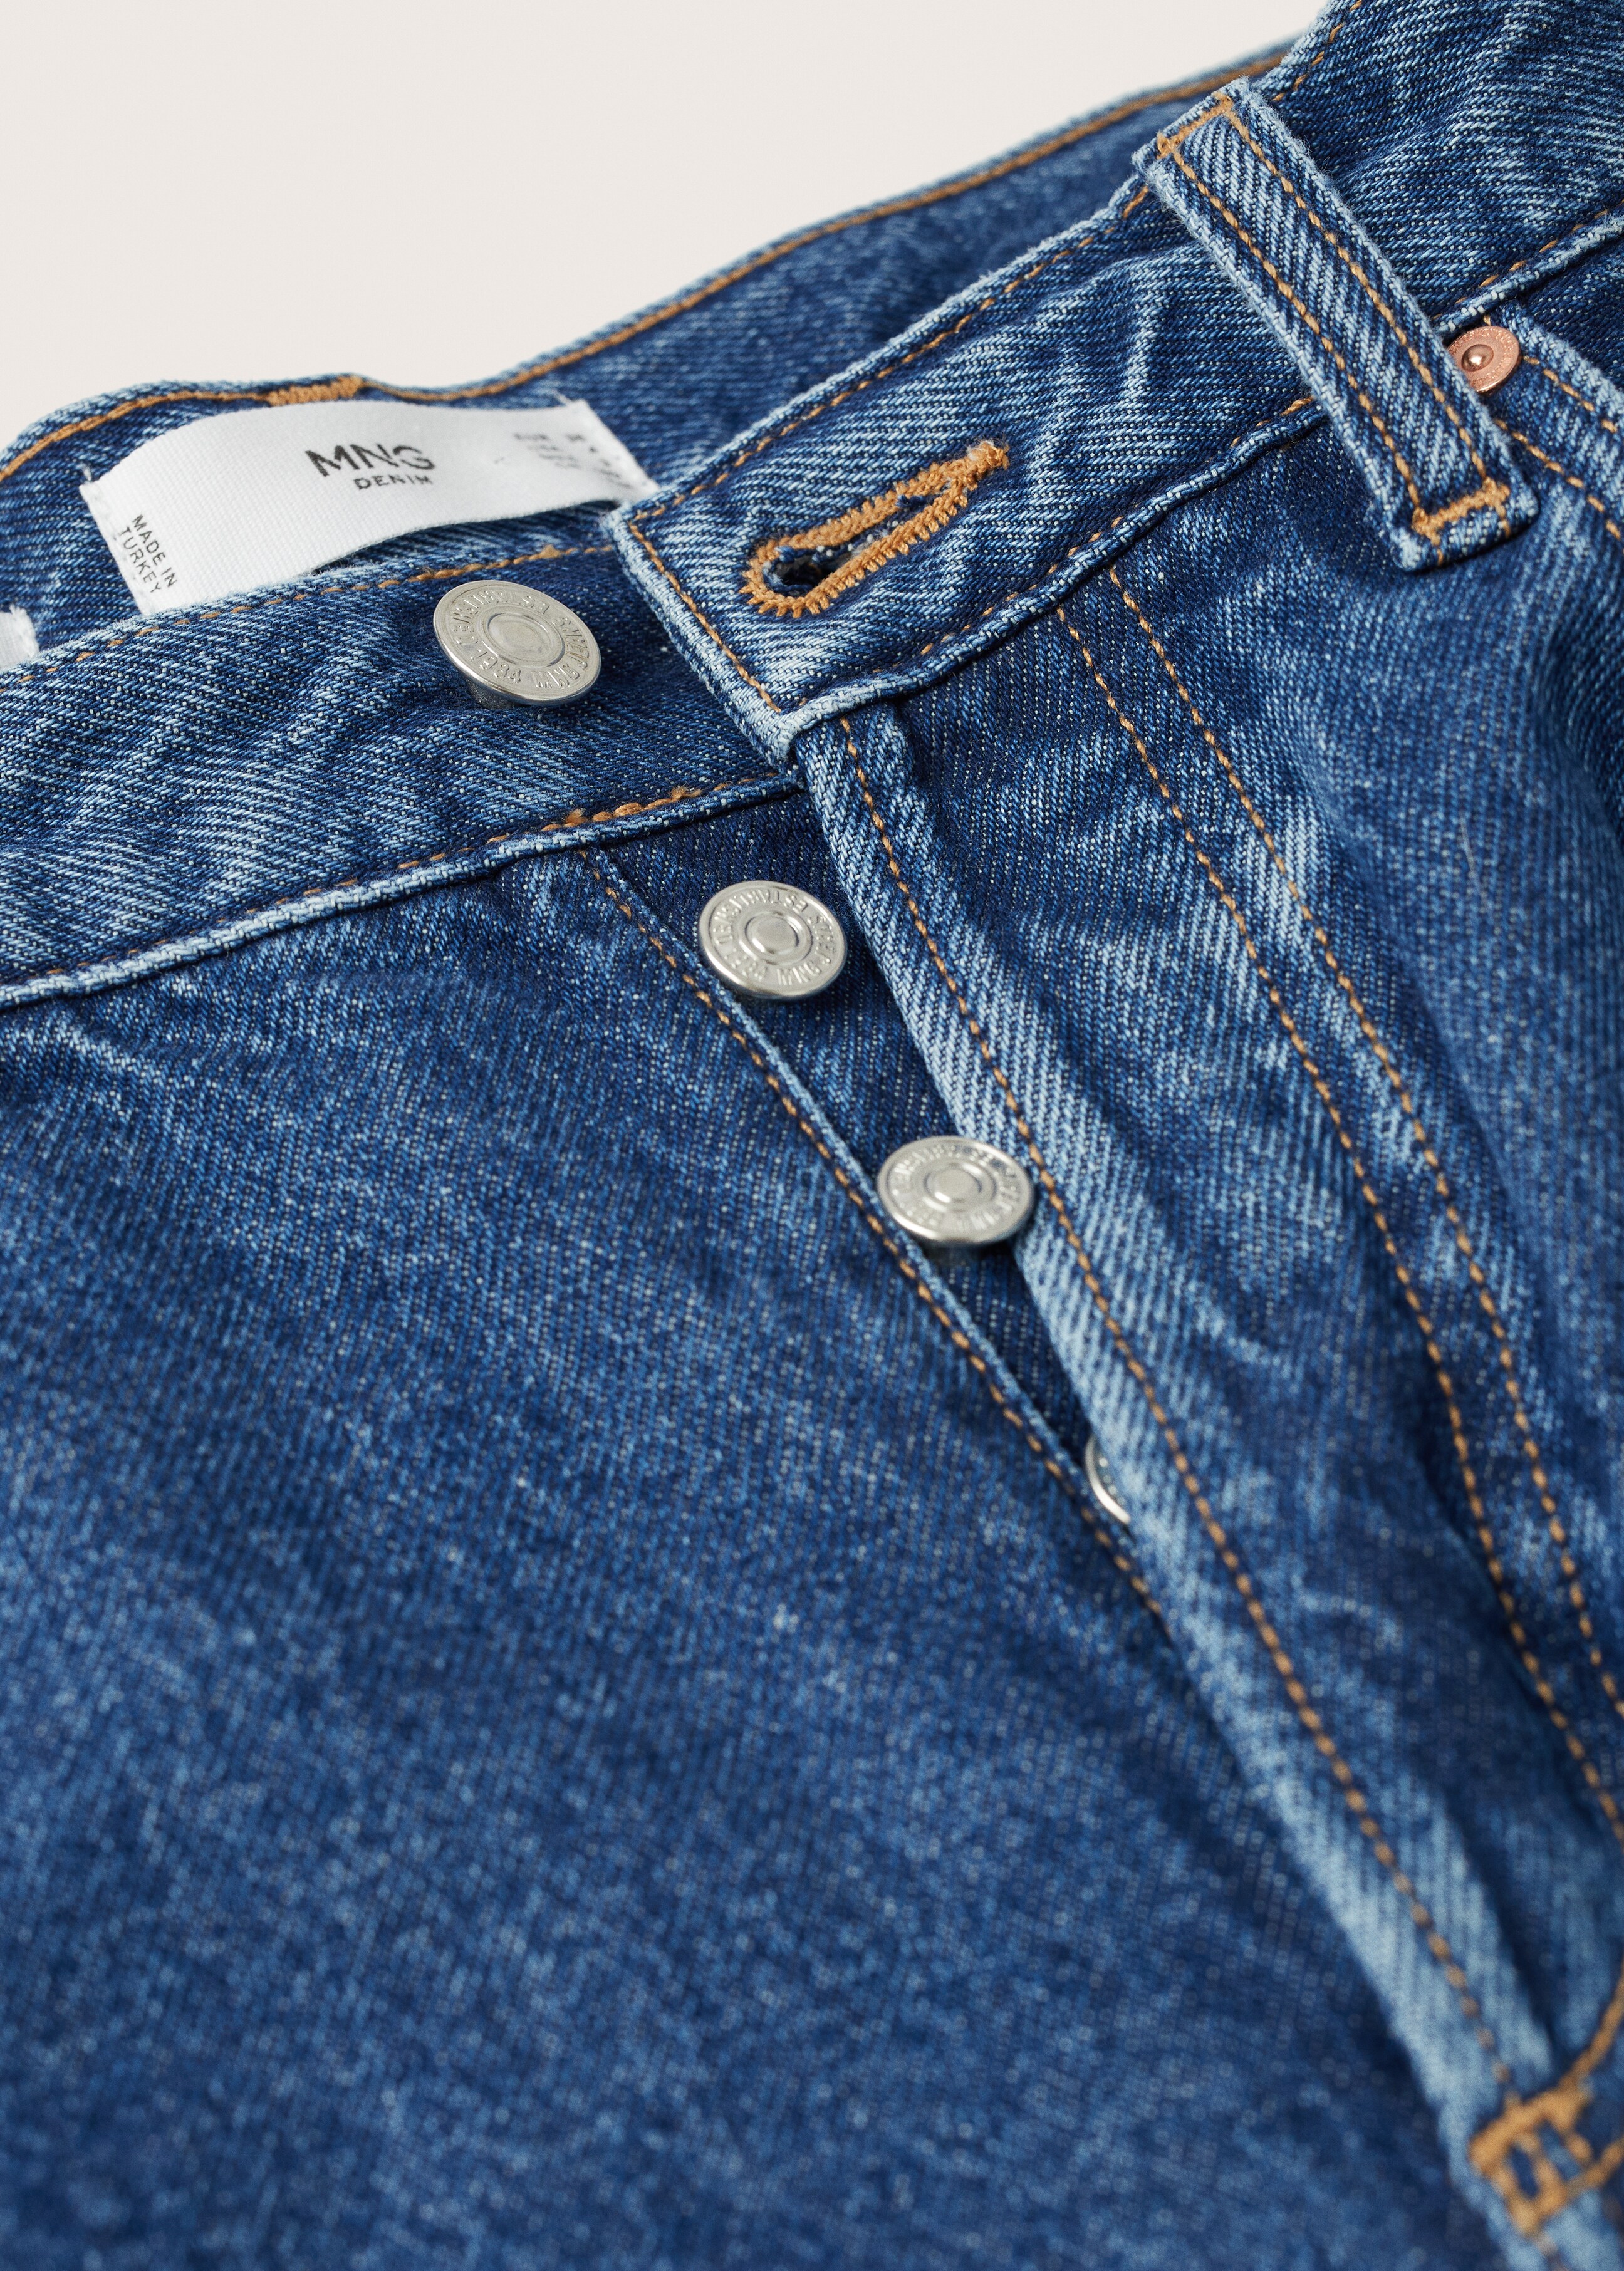 High-waist straight jeans - Details of the article 8